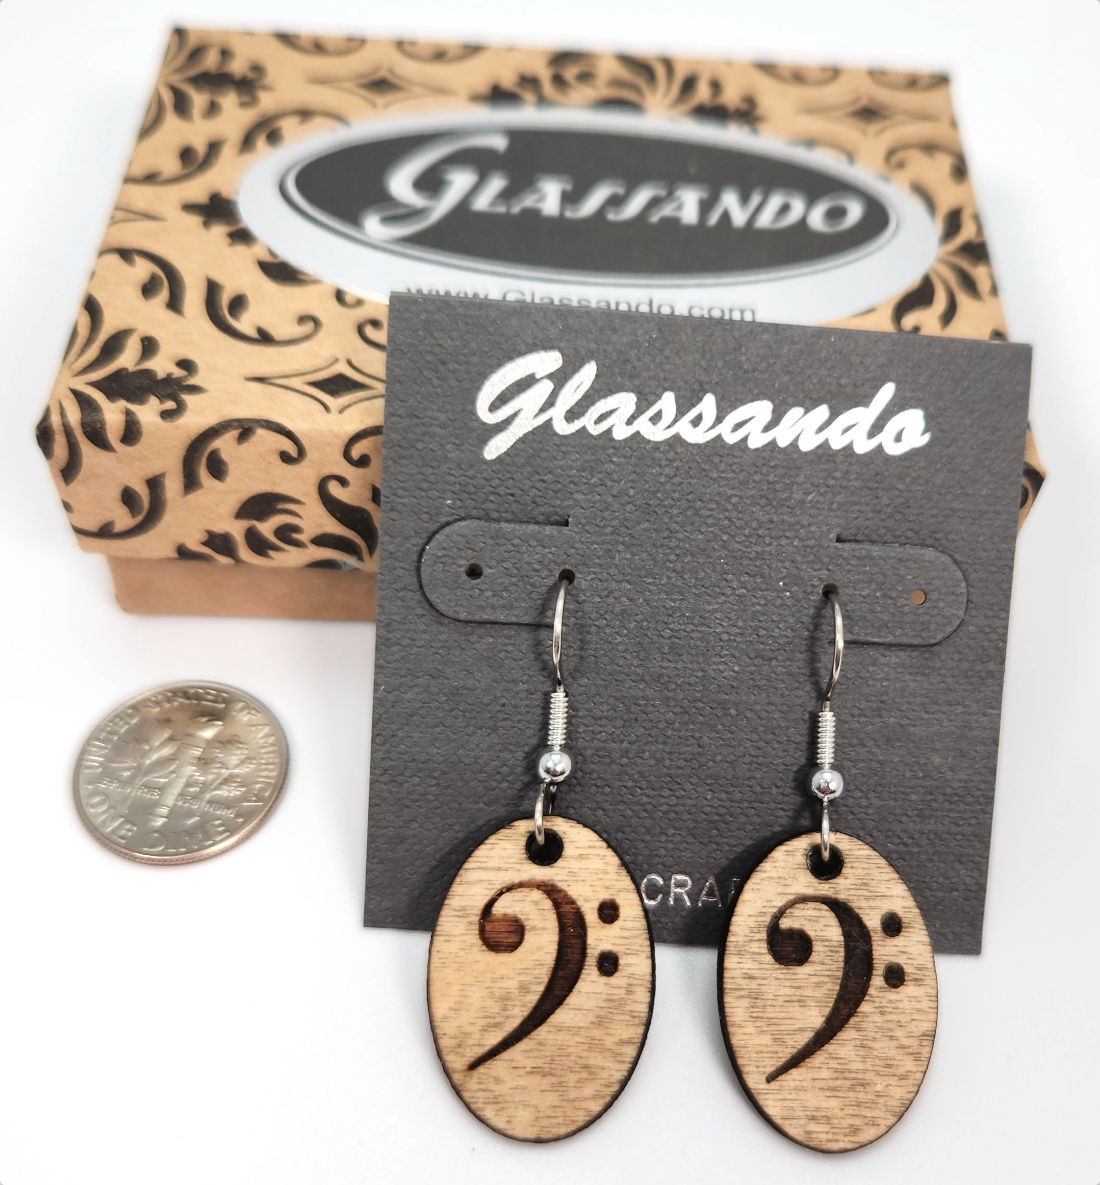 bass clef earrings with dime for size comparison